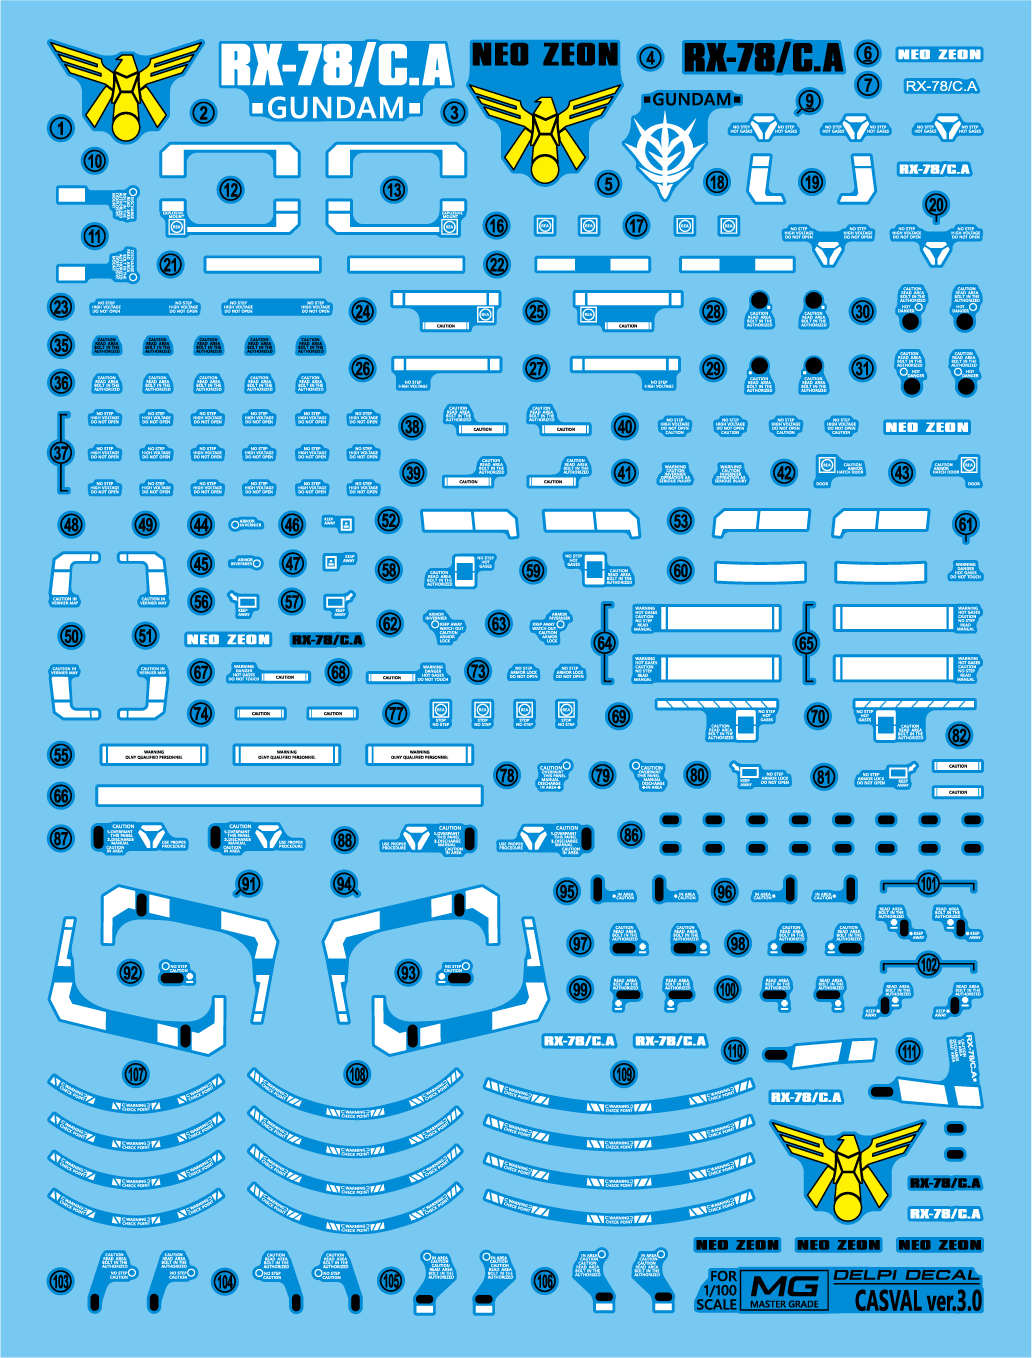 Delpi - MG CASVAL'S GUNDAM 3.0 WATER DECAL - (Select Normal or Holo)